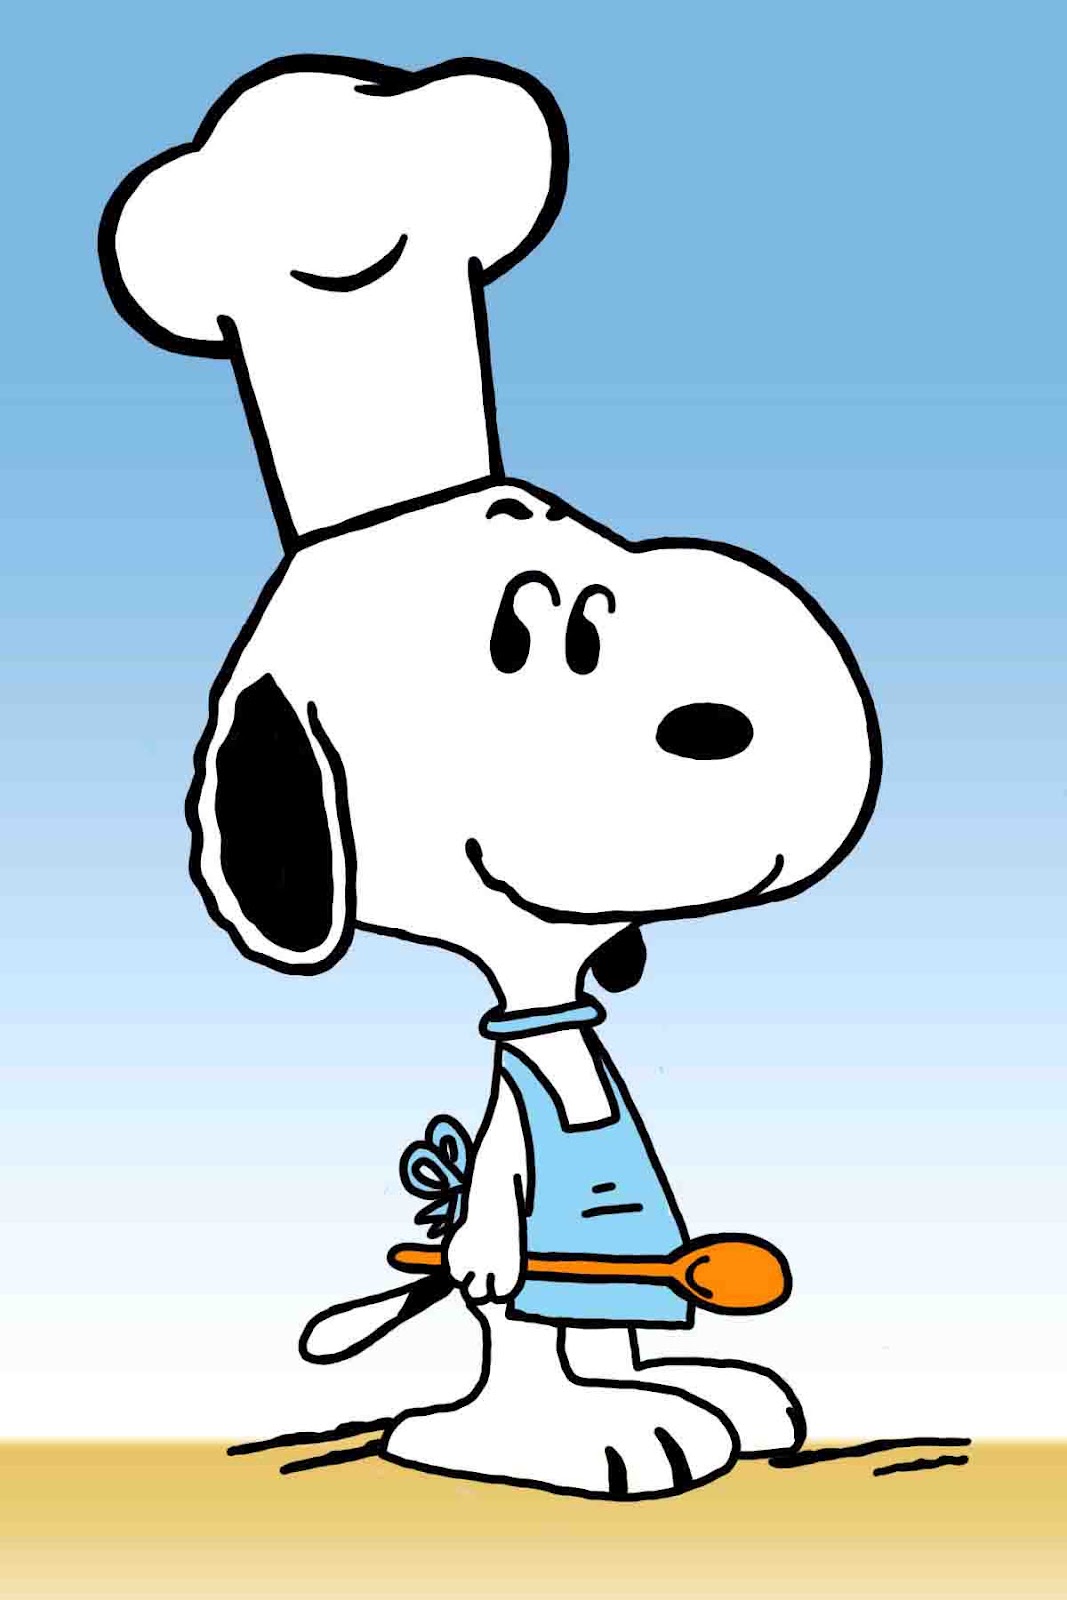 If Any Of You Find Any More Snoopy Clip Arts Can You Please Share